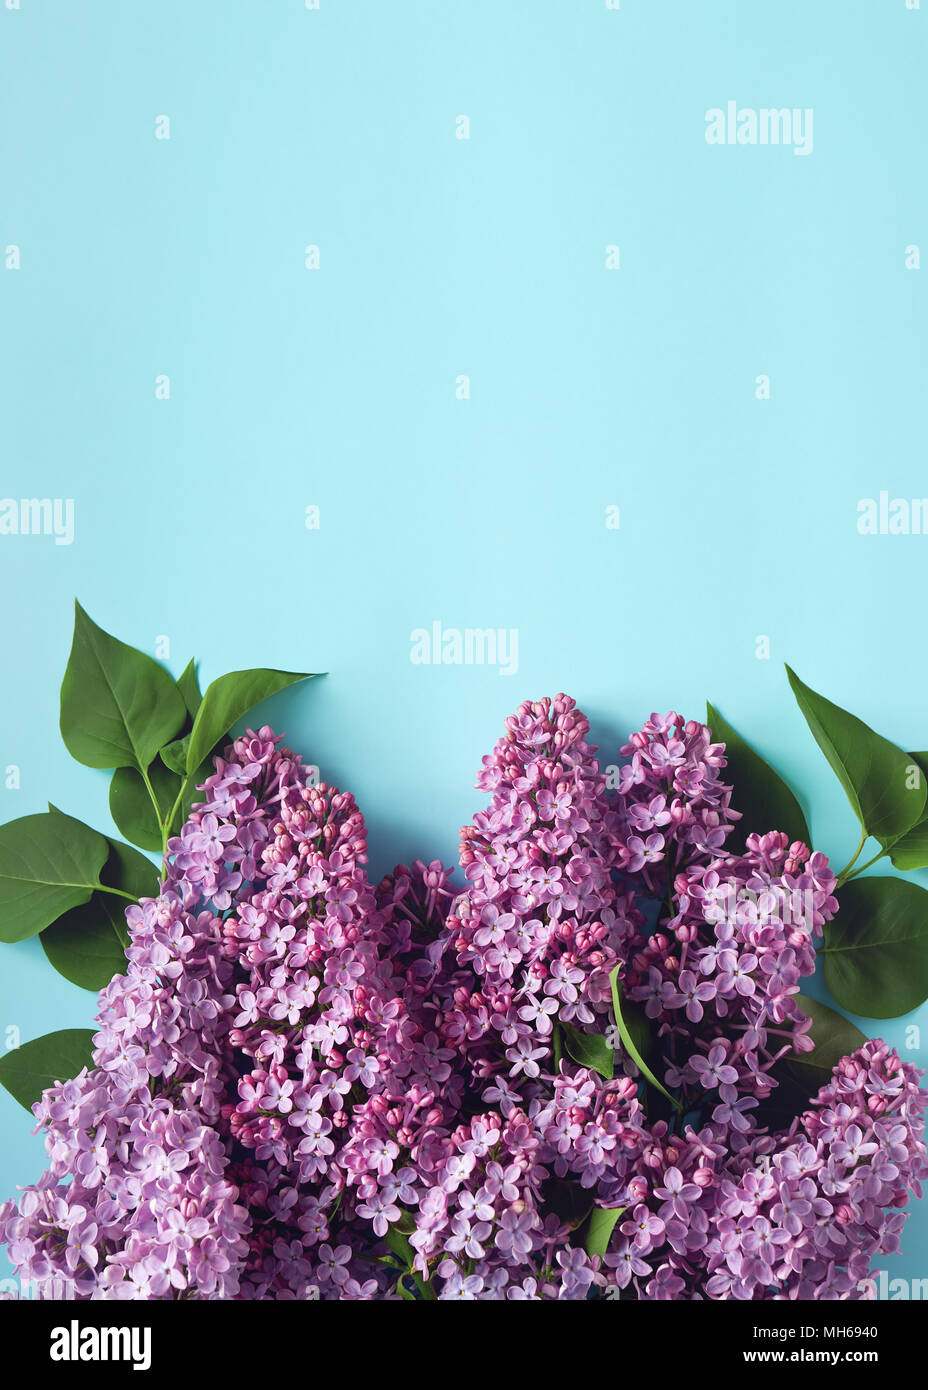 Sprigs of purple lilac on light blue background, viewed from above. Copy space. Stock Photo